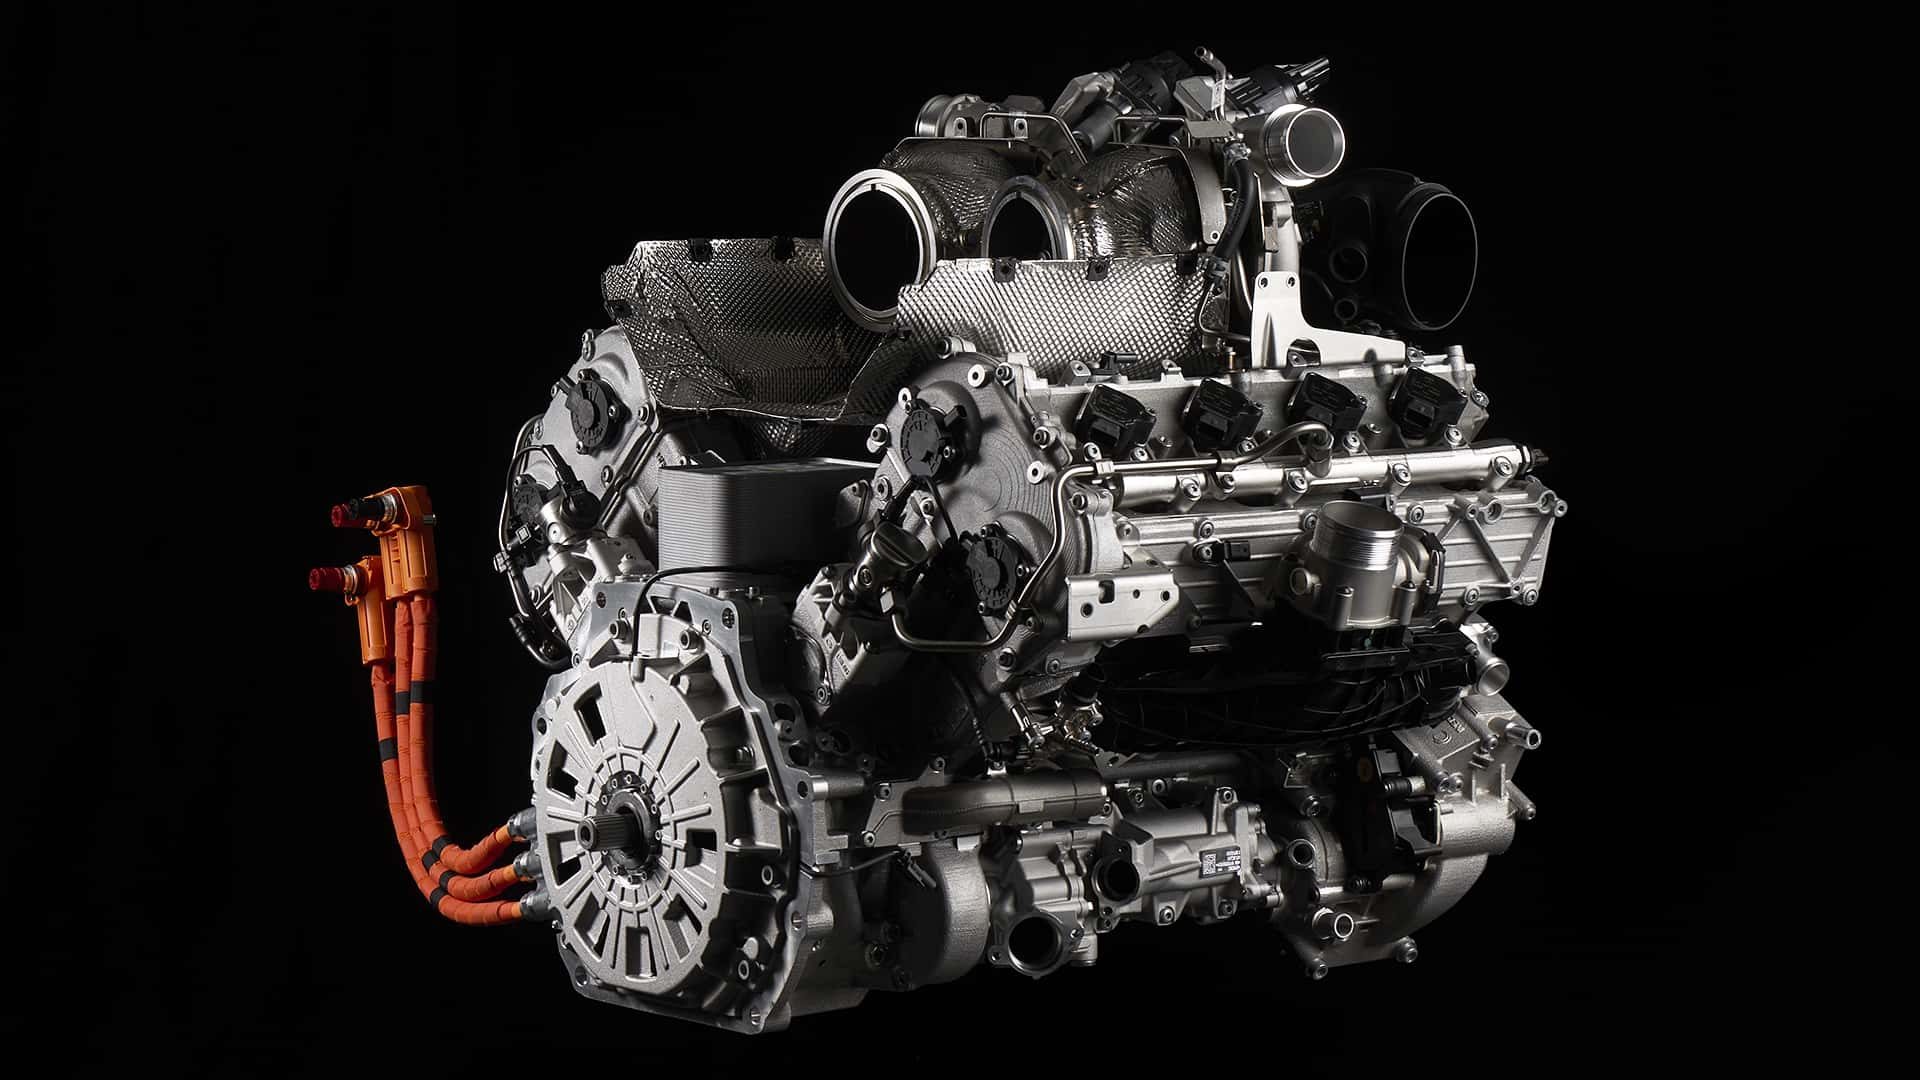 New biturbo V8 designed for Huracan replacement.